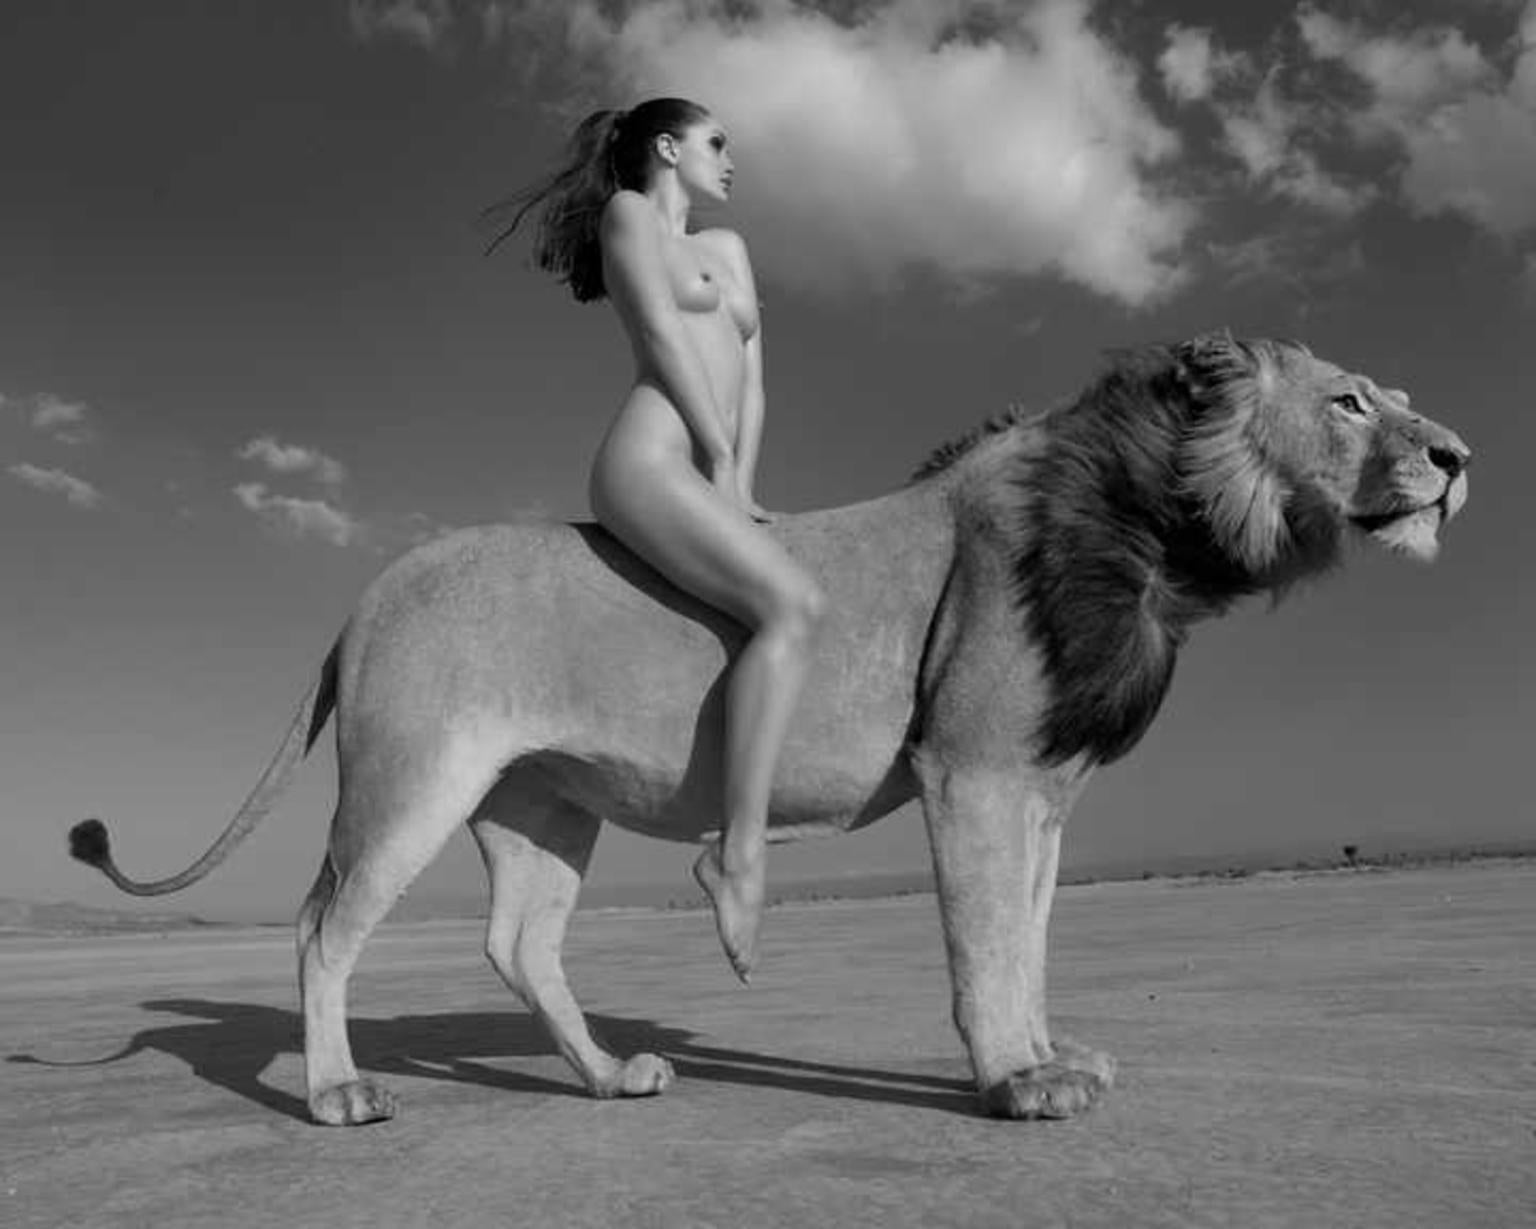 Angela rides the lion -  portrait of a female nude riding a lion in the desert